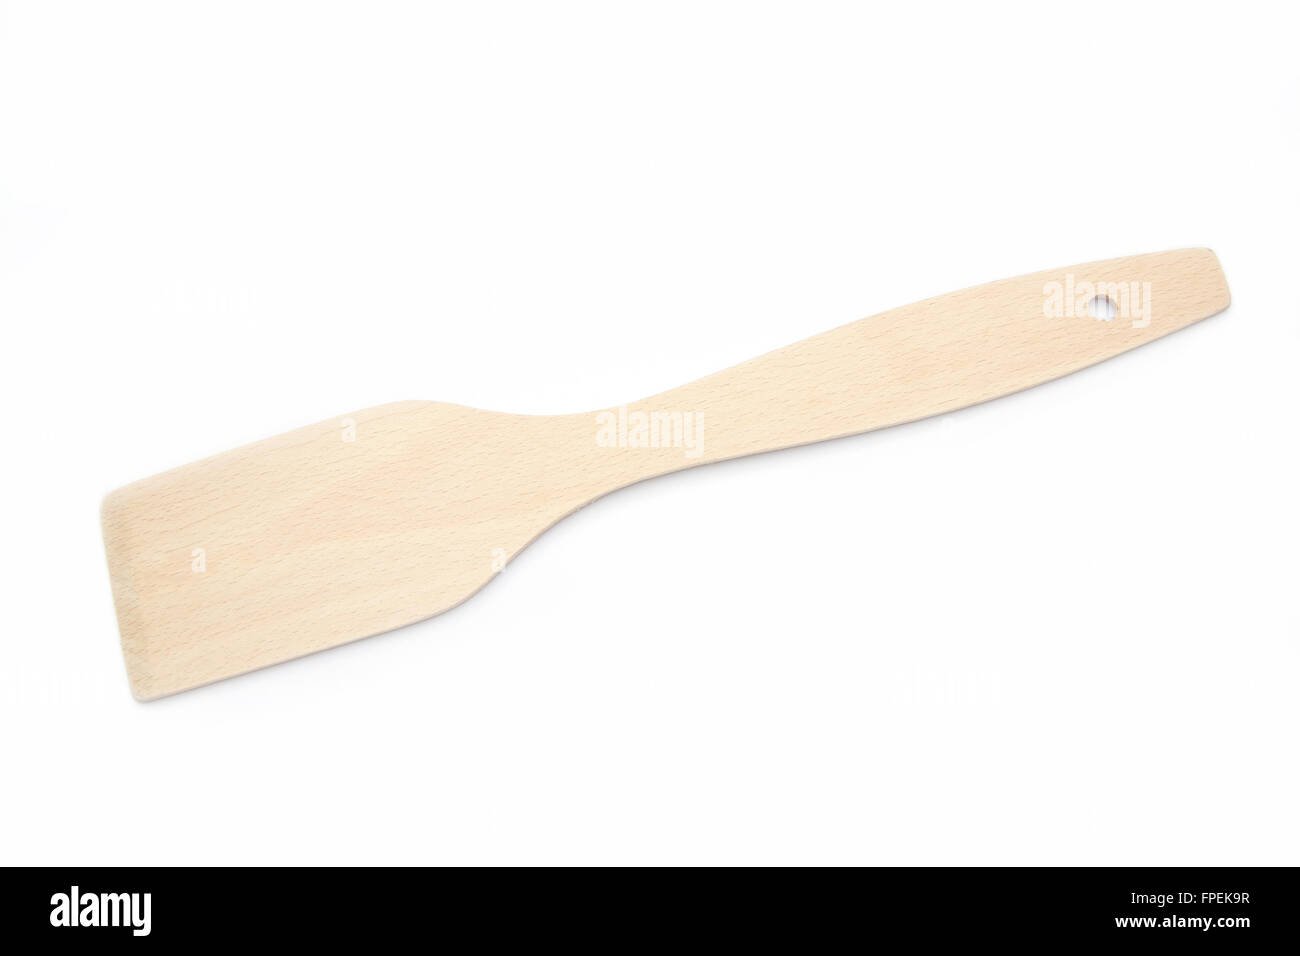 Wooden spatula on a white background Stock Photo